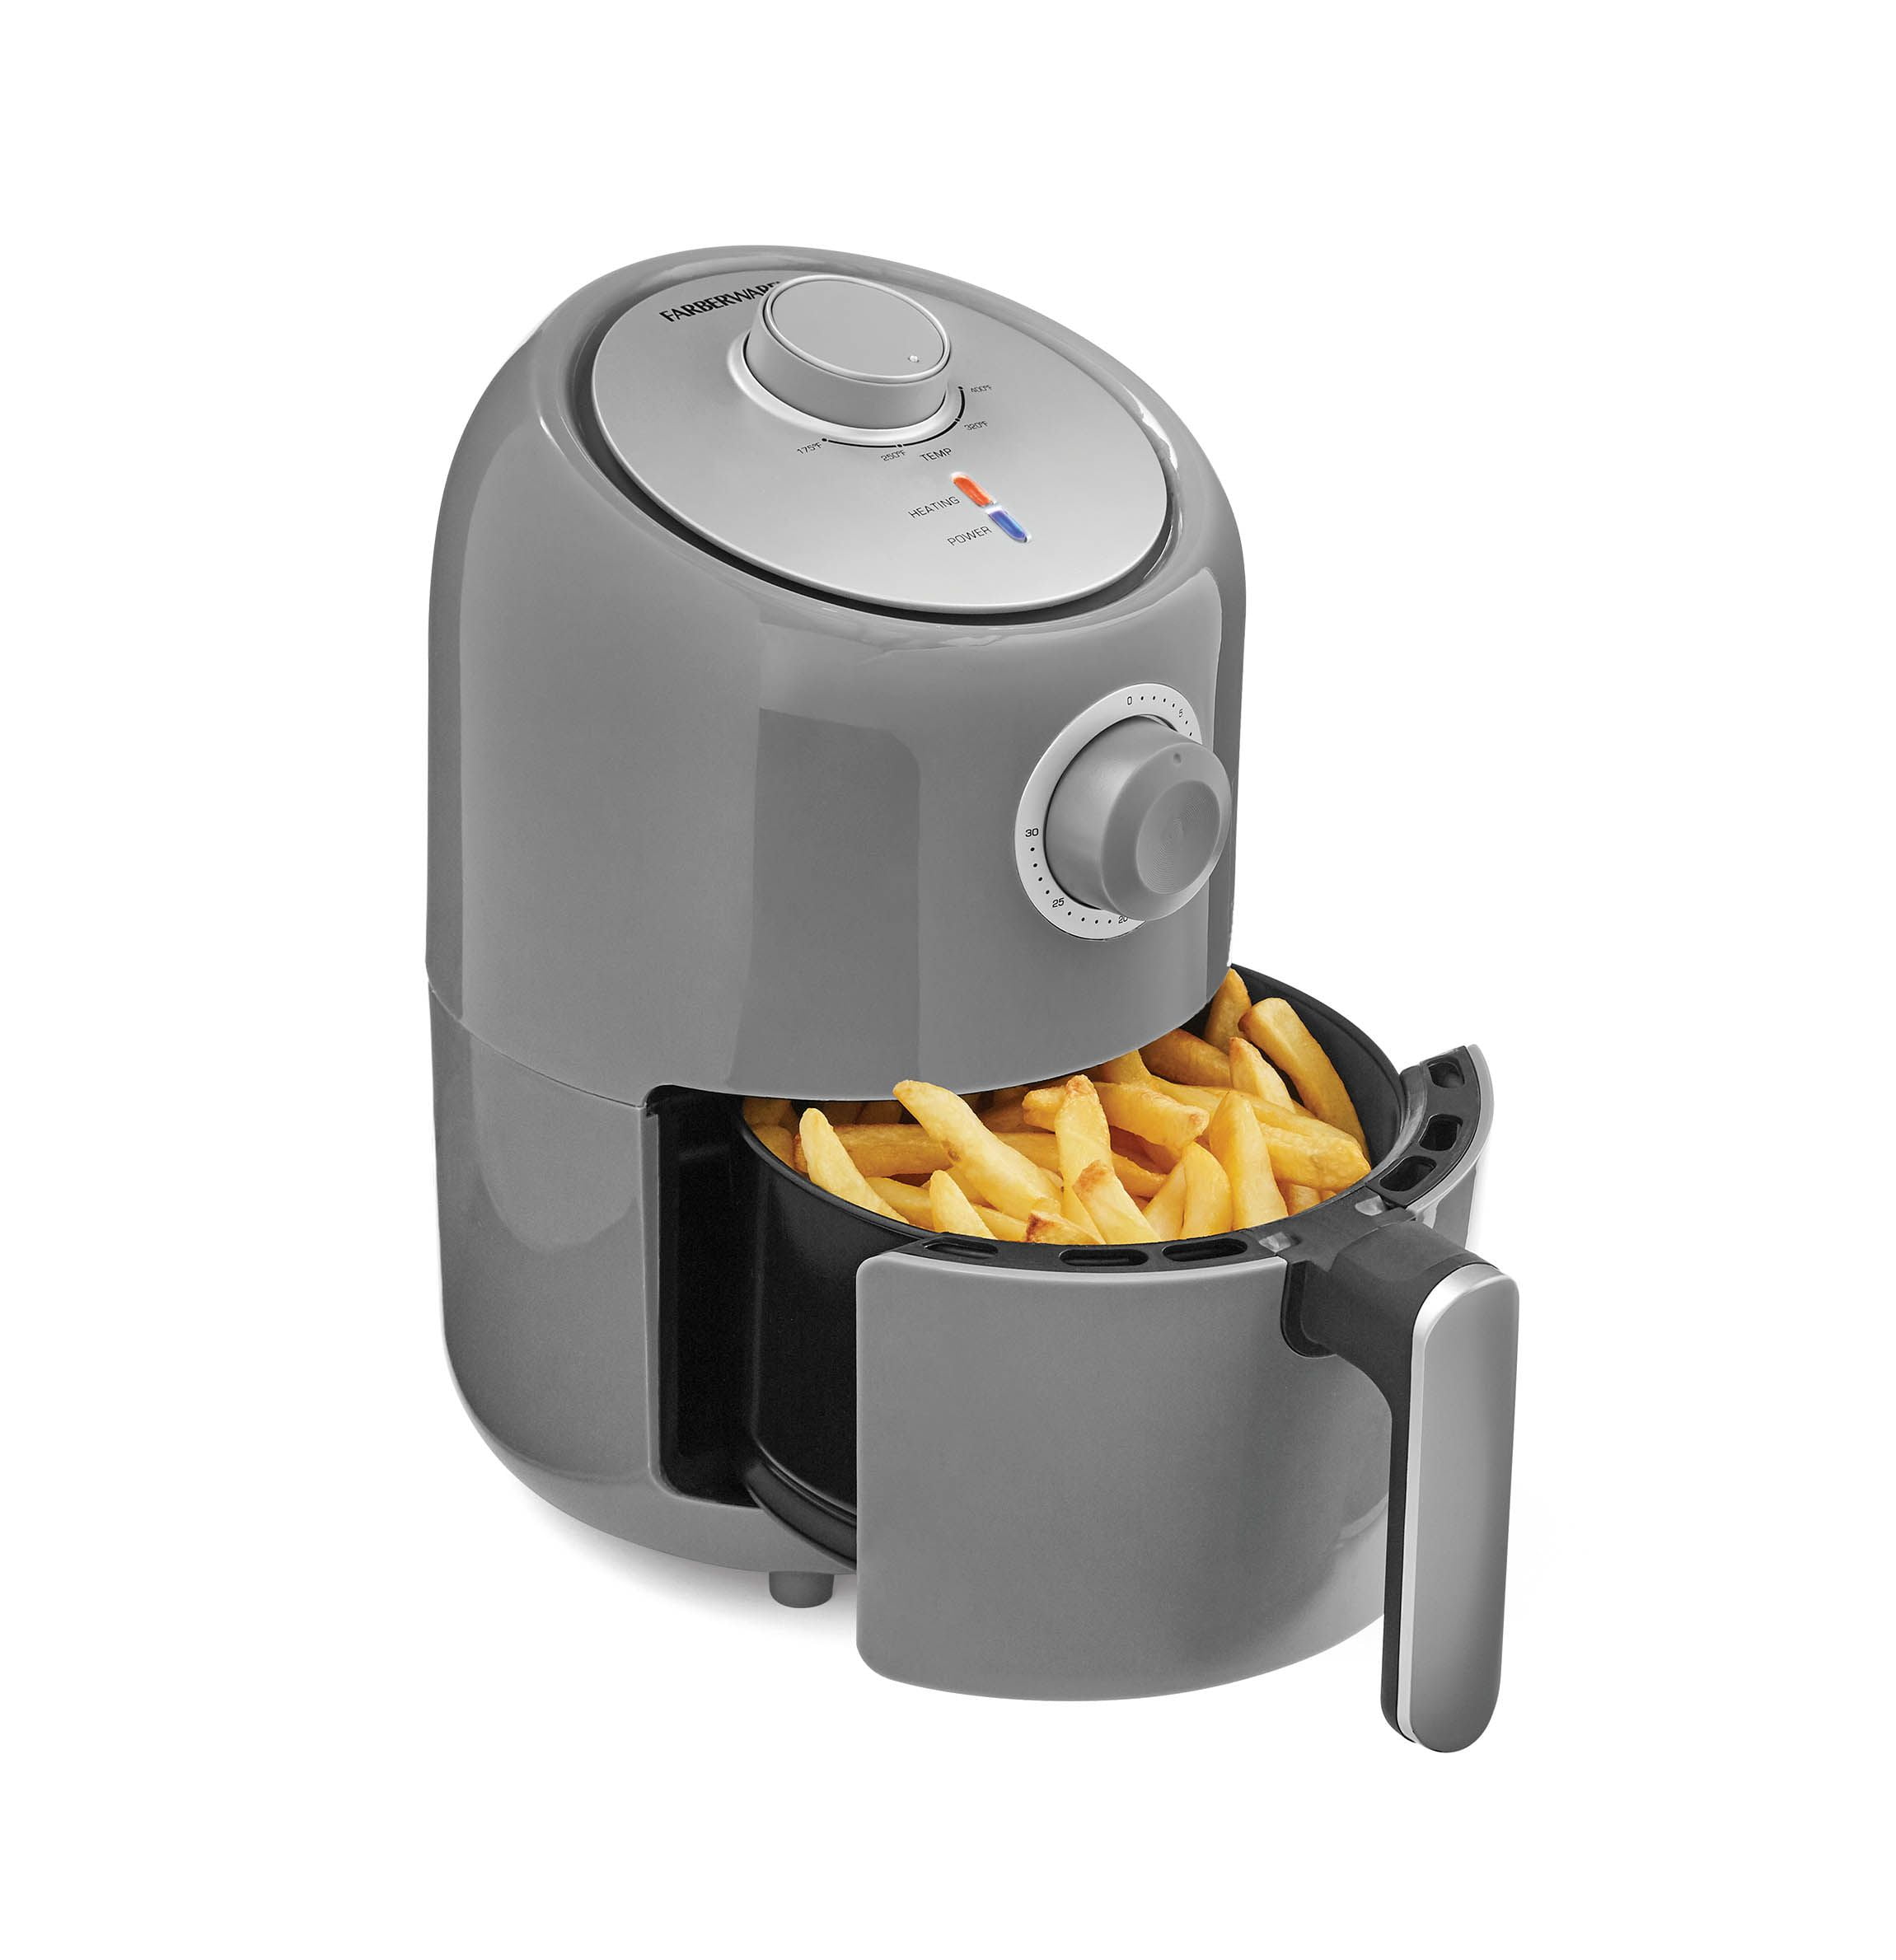 Farberware Compact Oil-Less Air Fryer 1.9 Qt FW-AF-GRY Grey Works Great